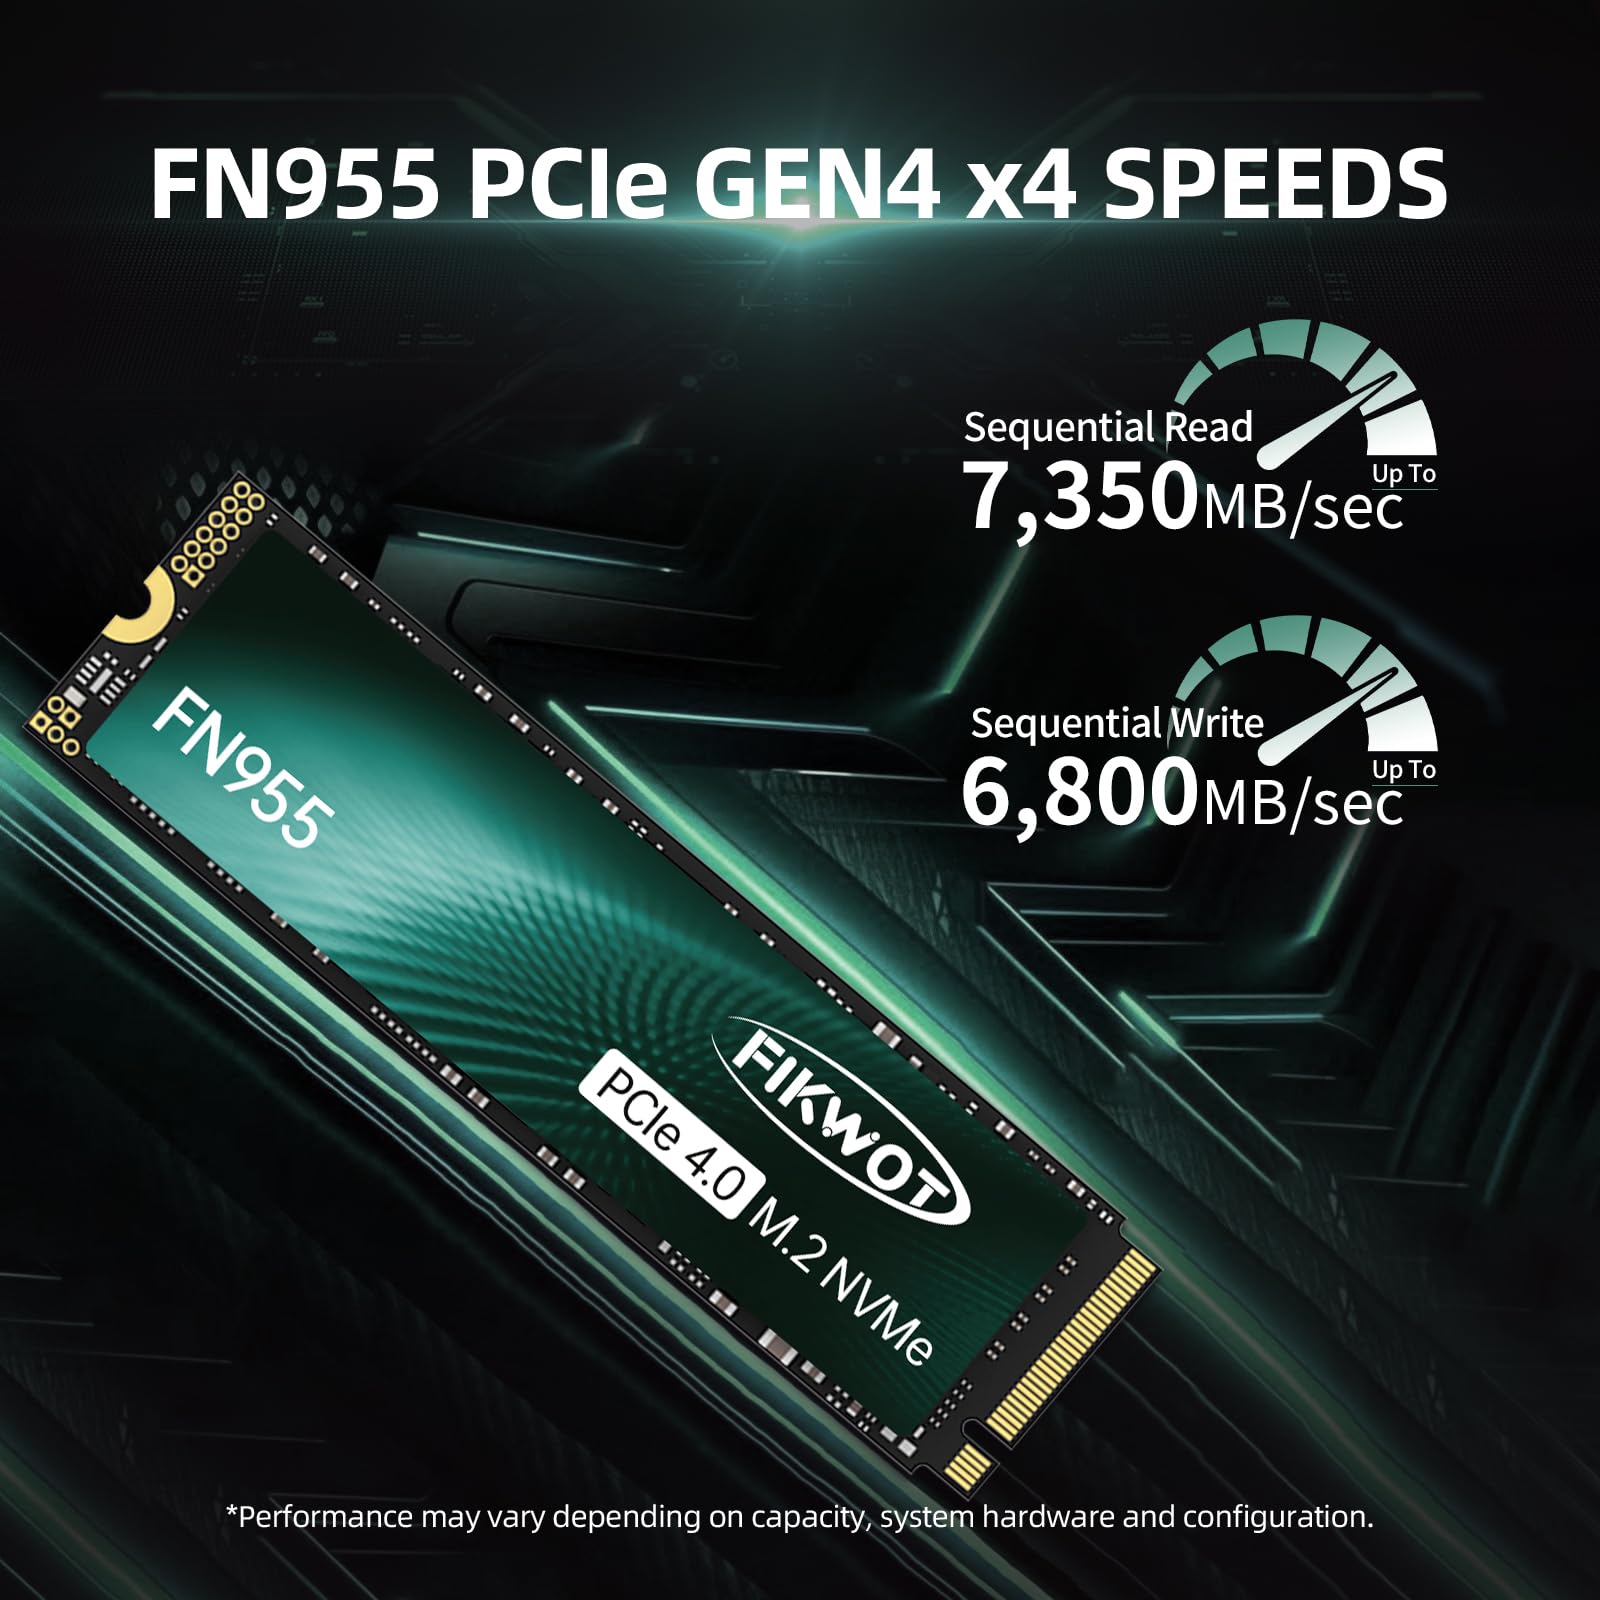 Fikwot FN970 PCIe 4.0 Gen4 NVMe SSD, The Best SSD for PS5 